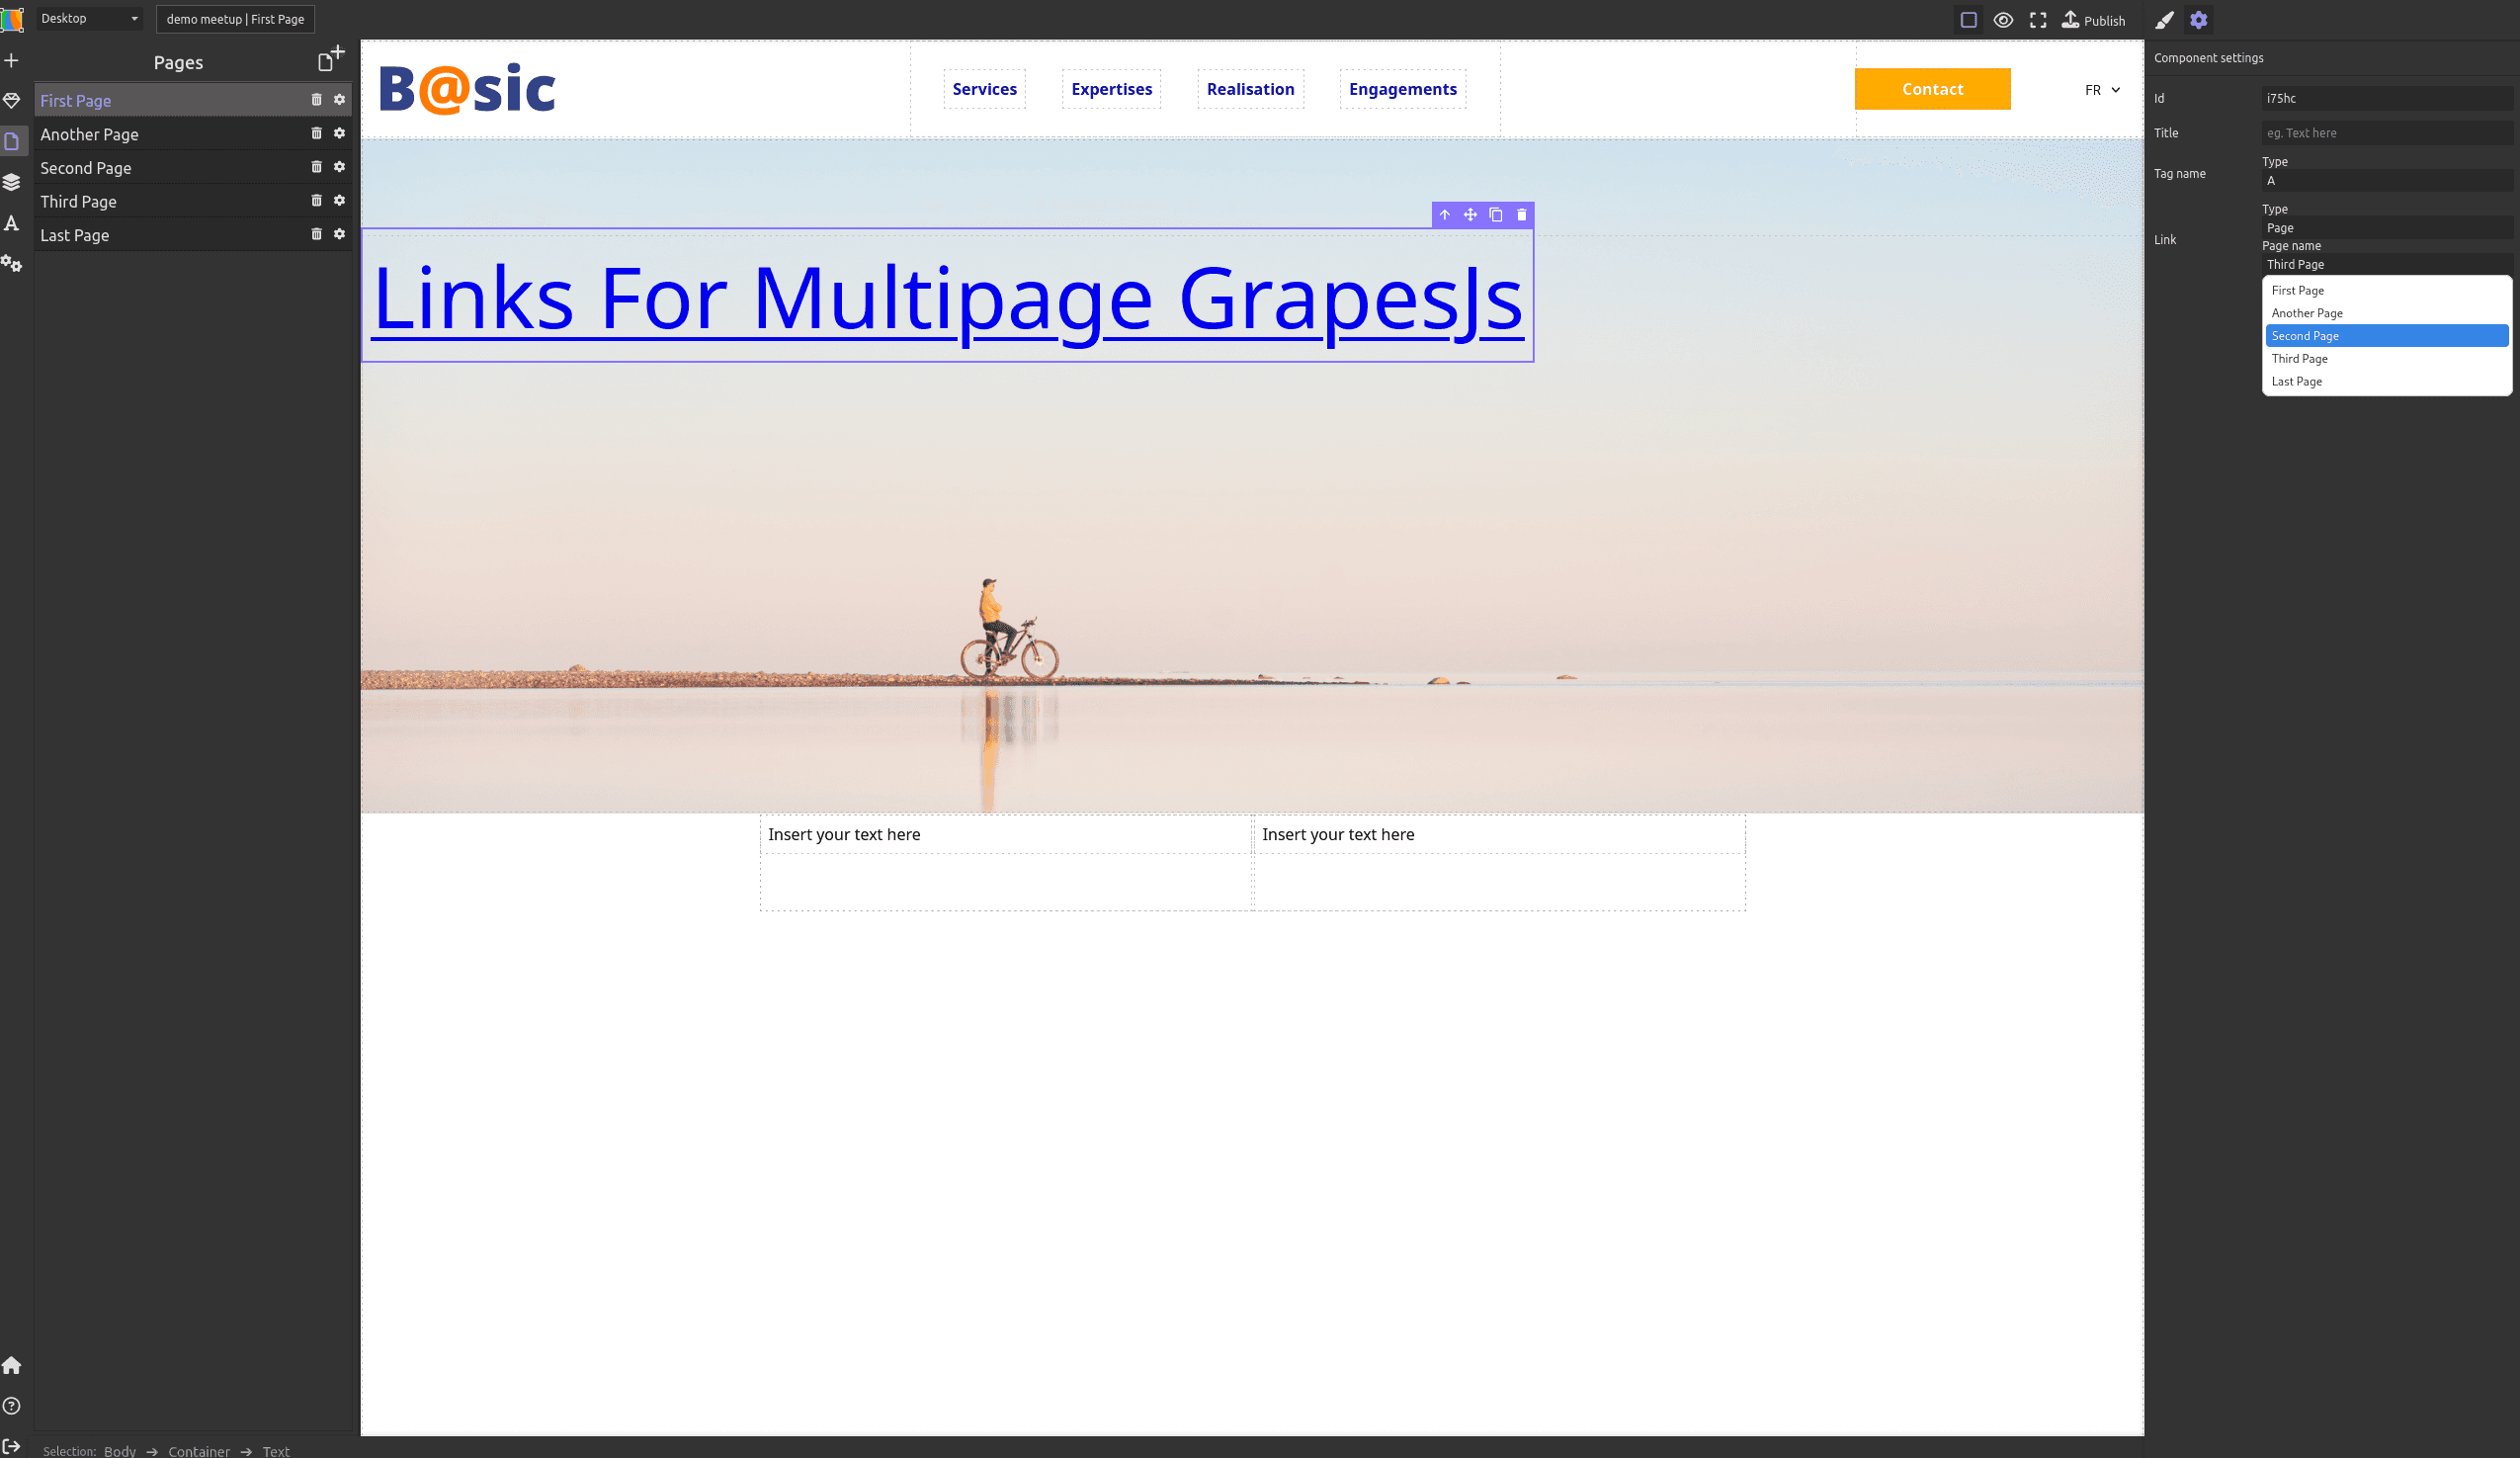 WIP: Links for Multipage websites - choose the best sets of plugins and presets for GrapesJS